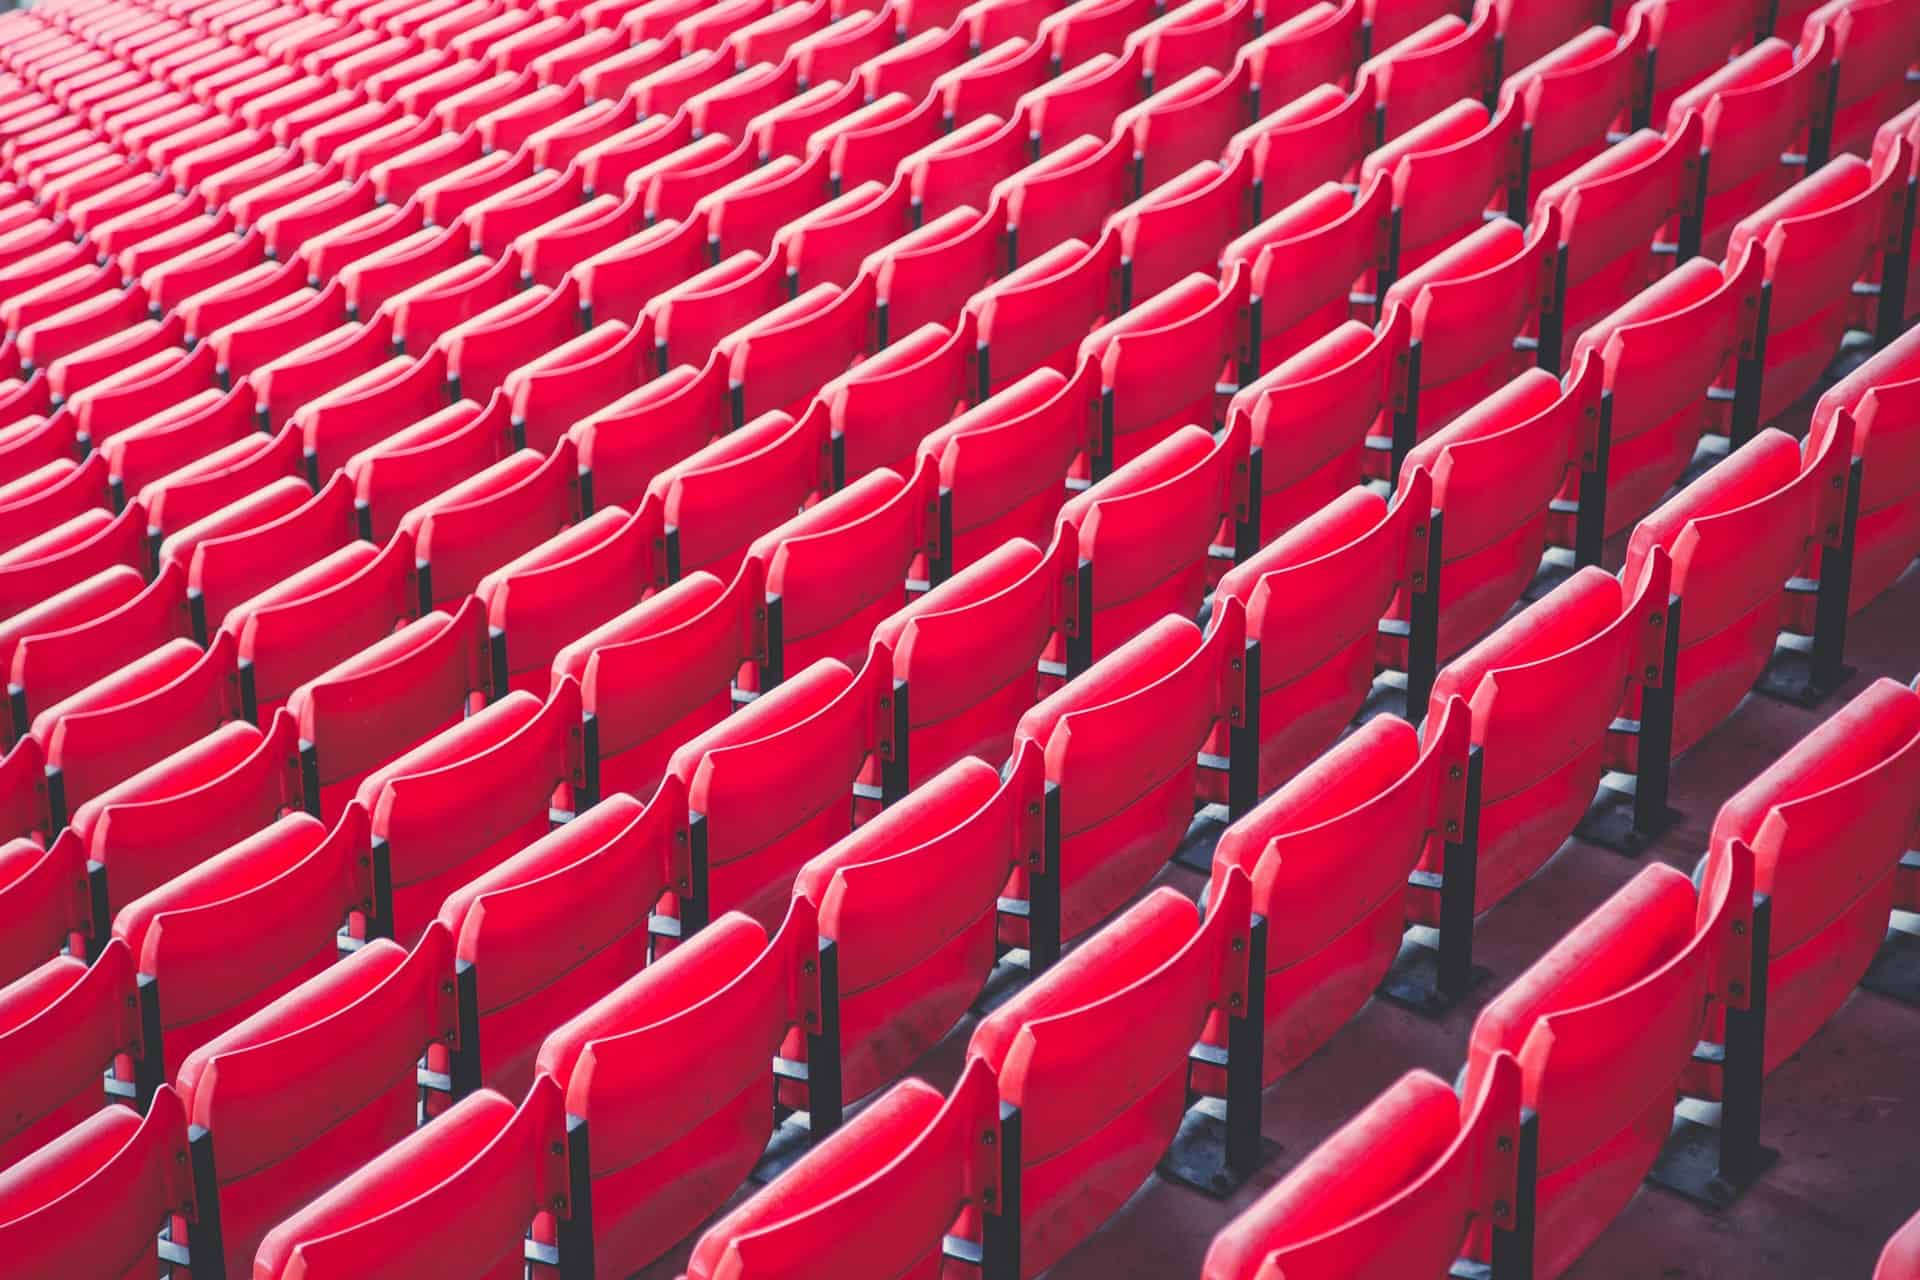 Rows and rows of red seating